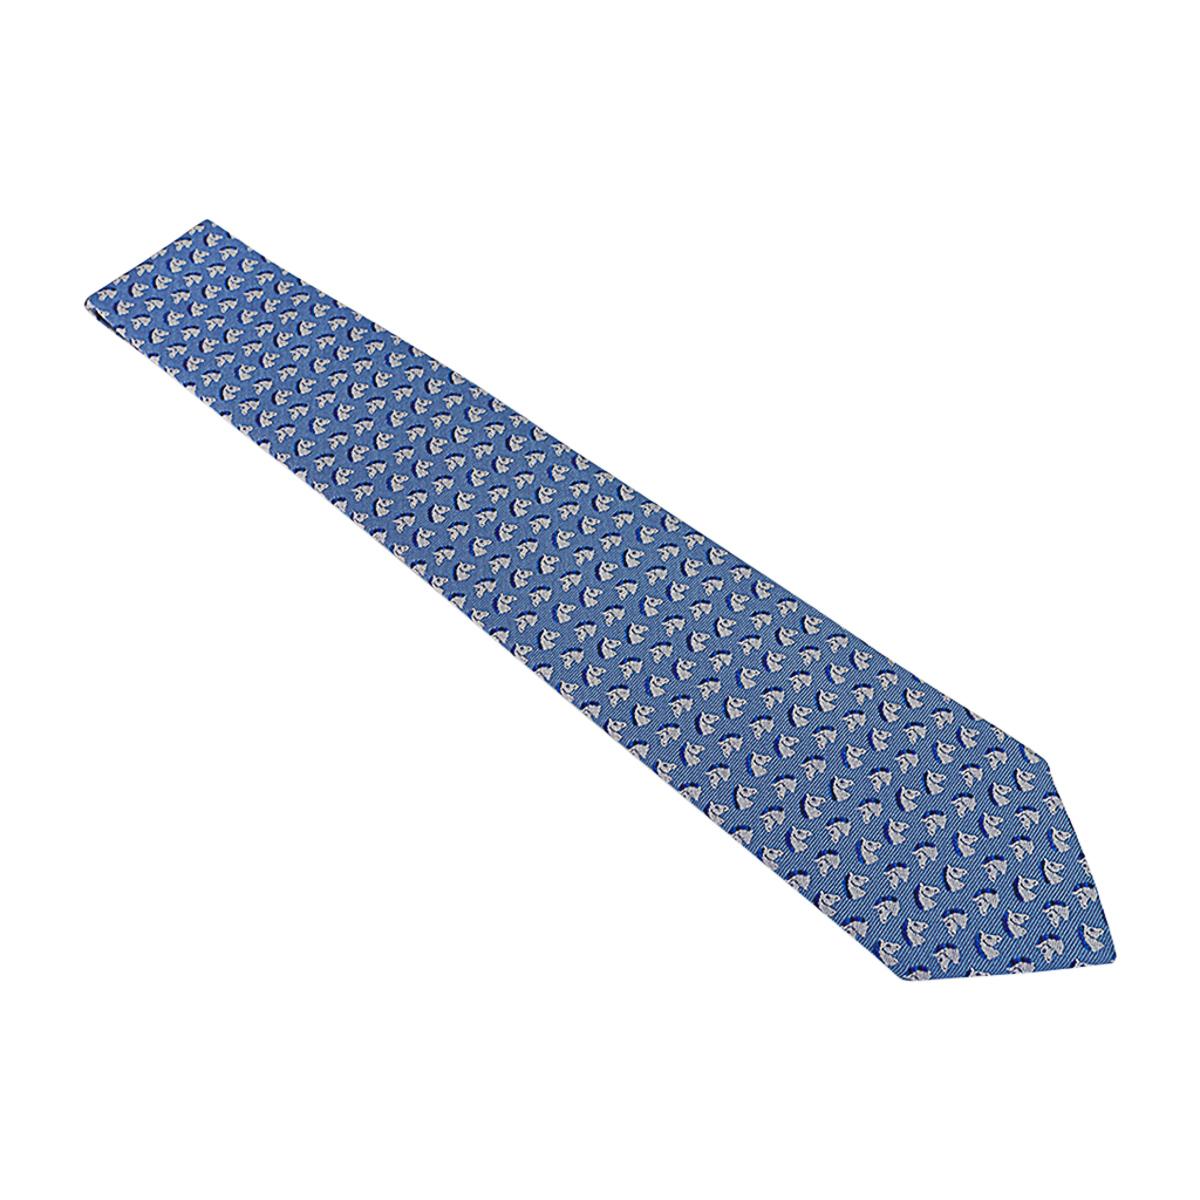 Hermes Cheval Rebelle Tie 7 Ciel Blanc and Marine Heavy Silk Twill For Sale 4